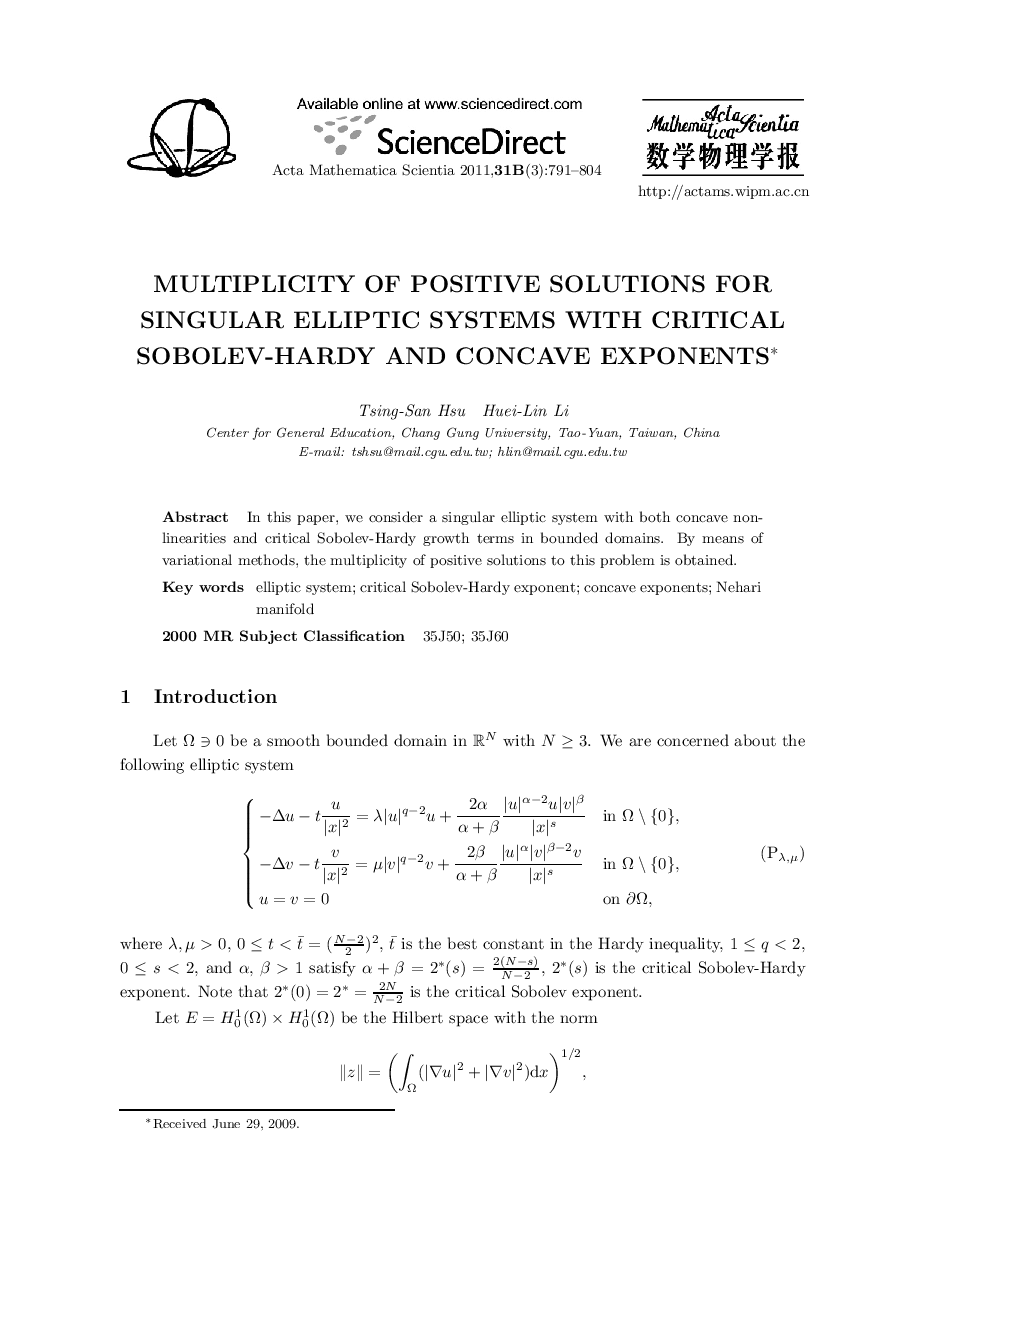 Multiplicity of positive solutions for singular elliptic systems with critical sobolev-hardy and concave exponents